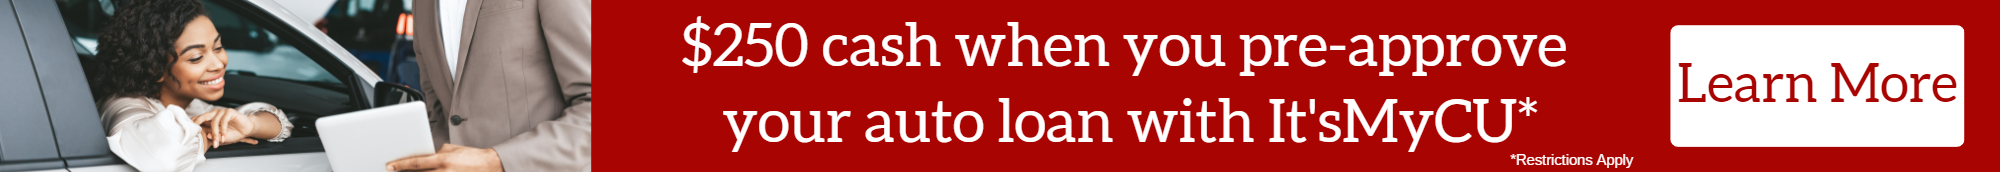 Pre-Approve an Auto Loan at It'sMyCU and get $250 Cash!